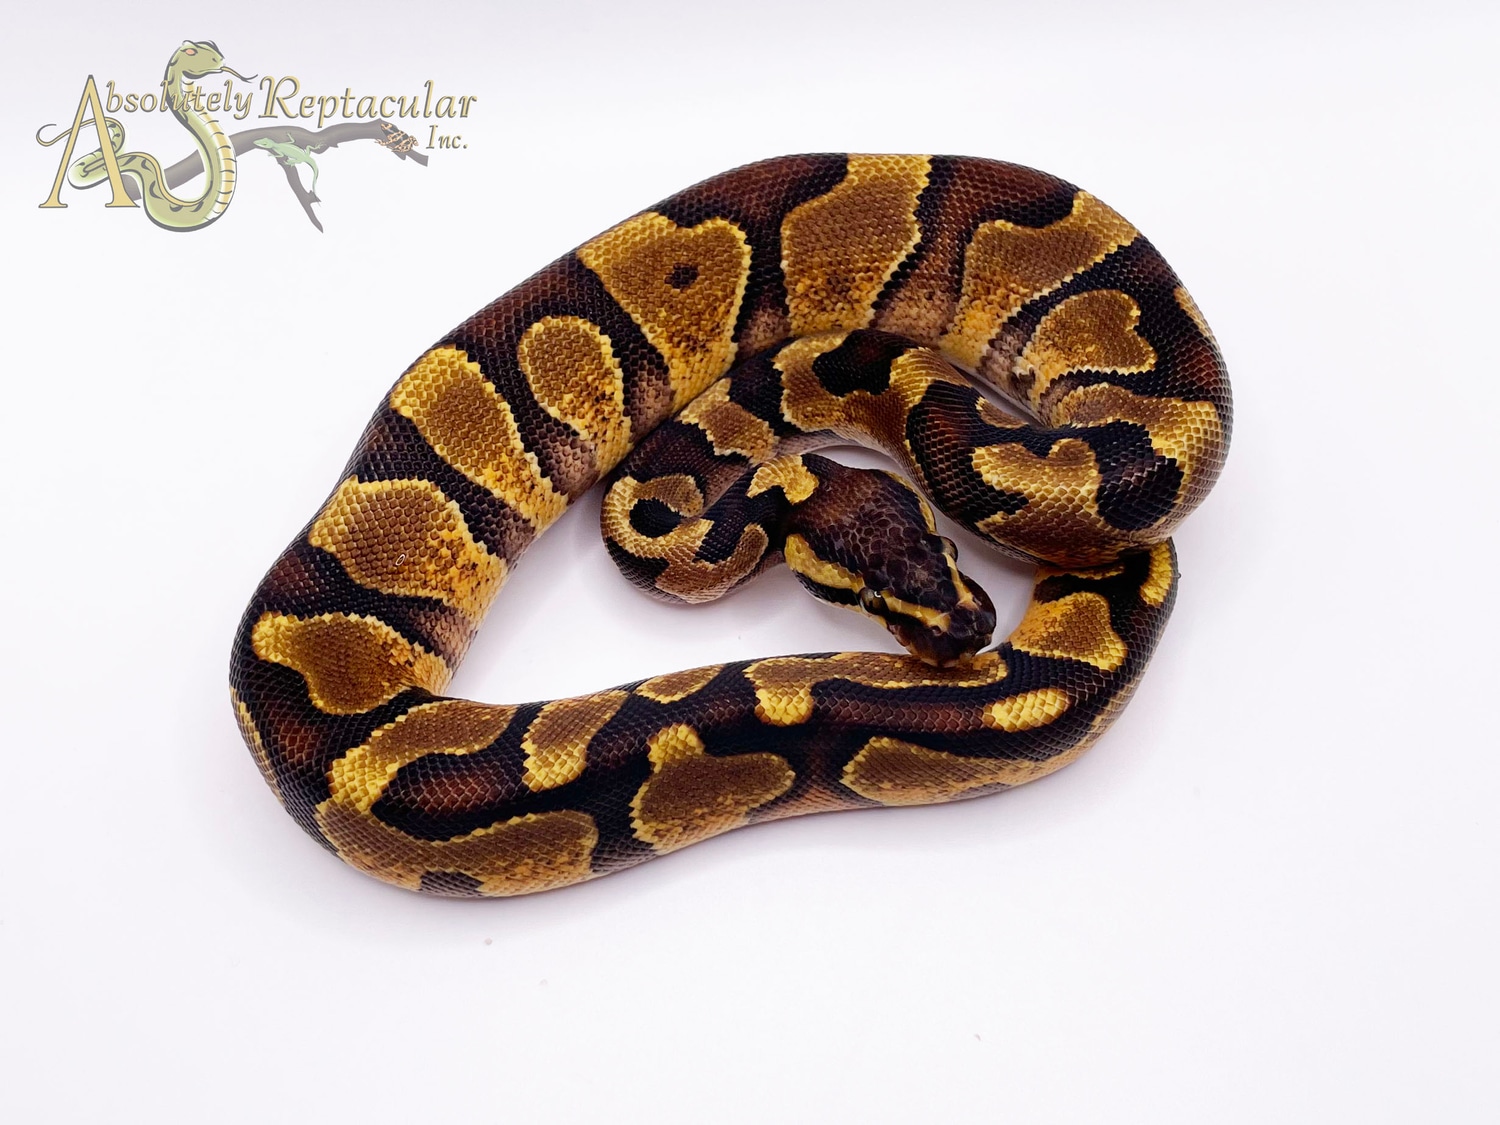 Enchi Surge Ball Python by Absolutely Reptacular